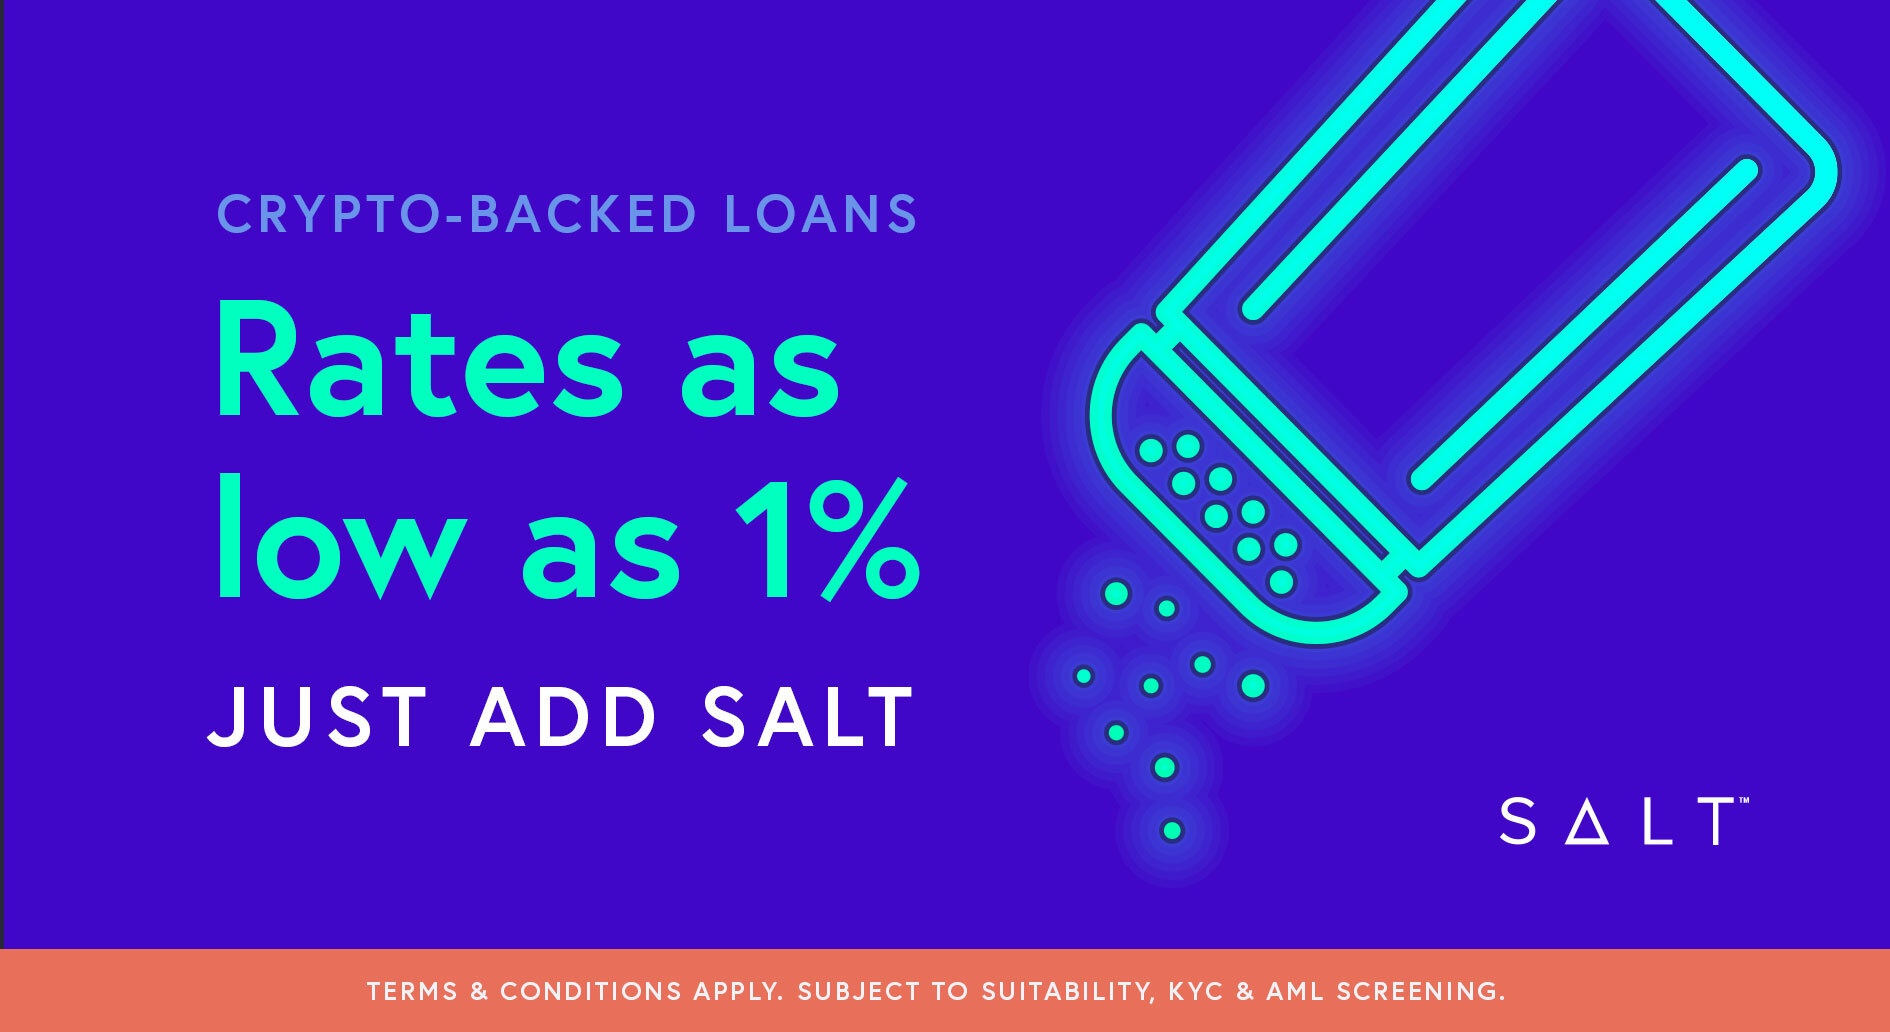 PROMO: Want a rate as low as 1%? Just add SALT. - SALT Lending